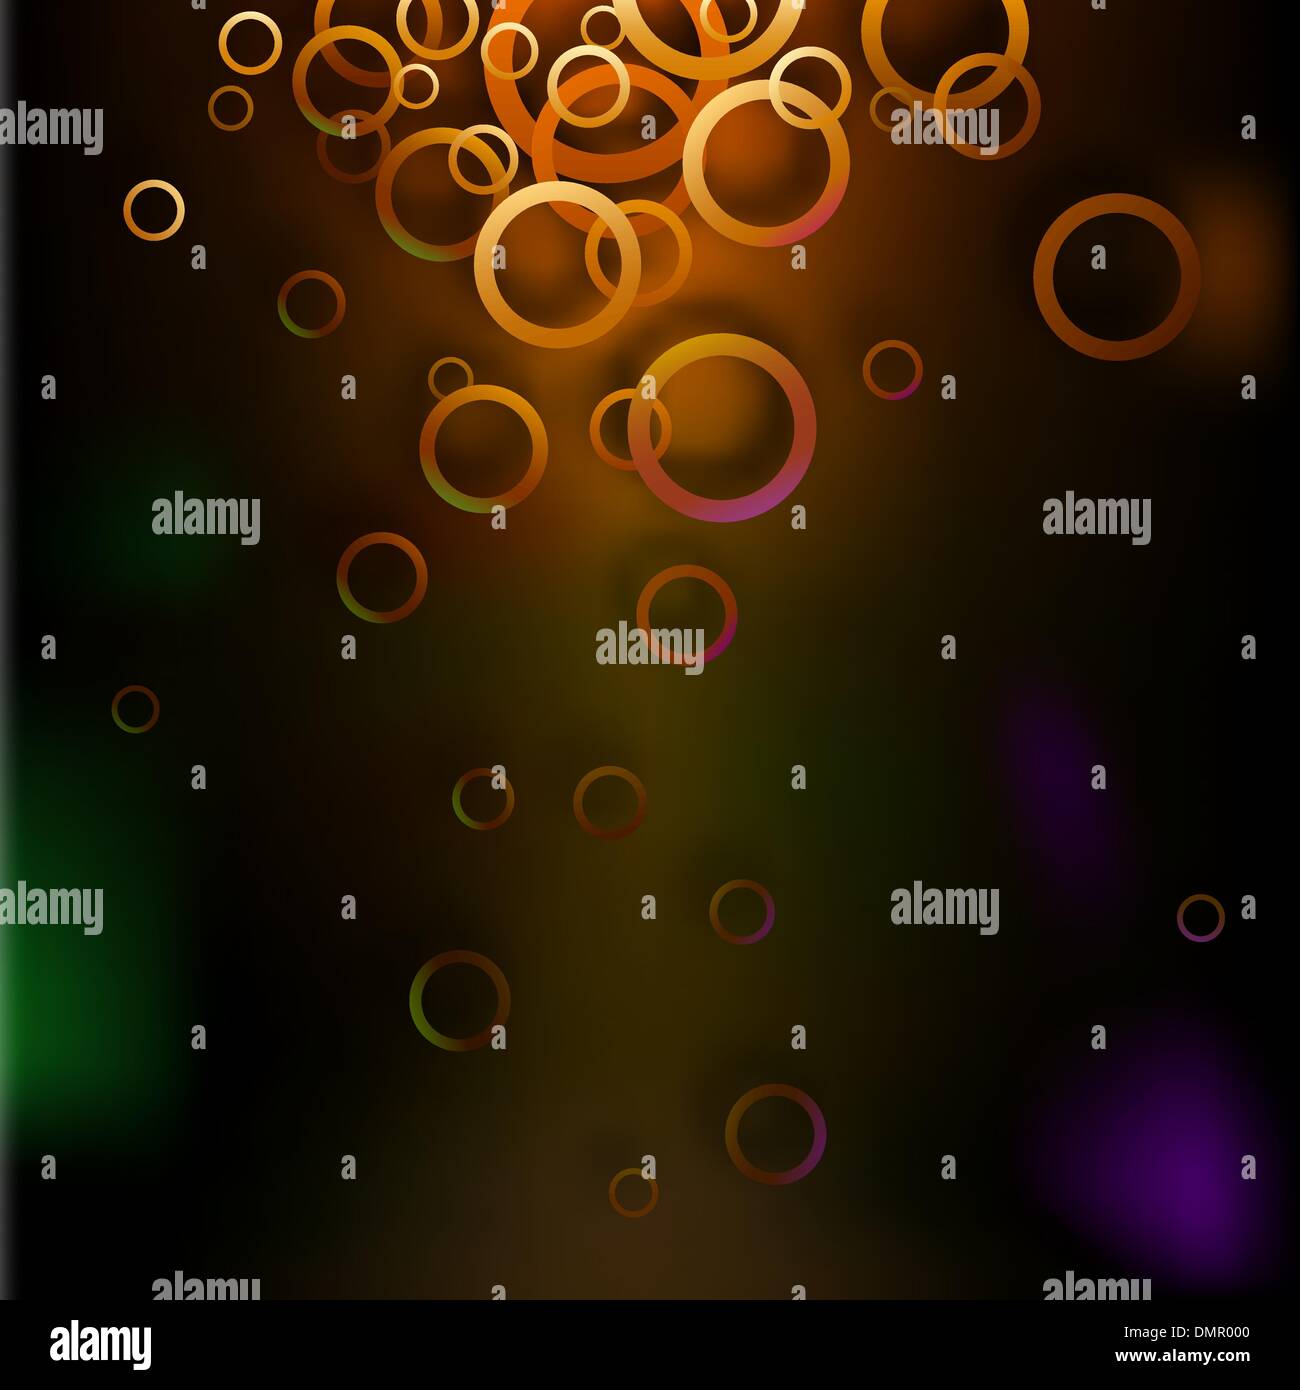 Floating rings Stock Vector